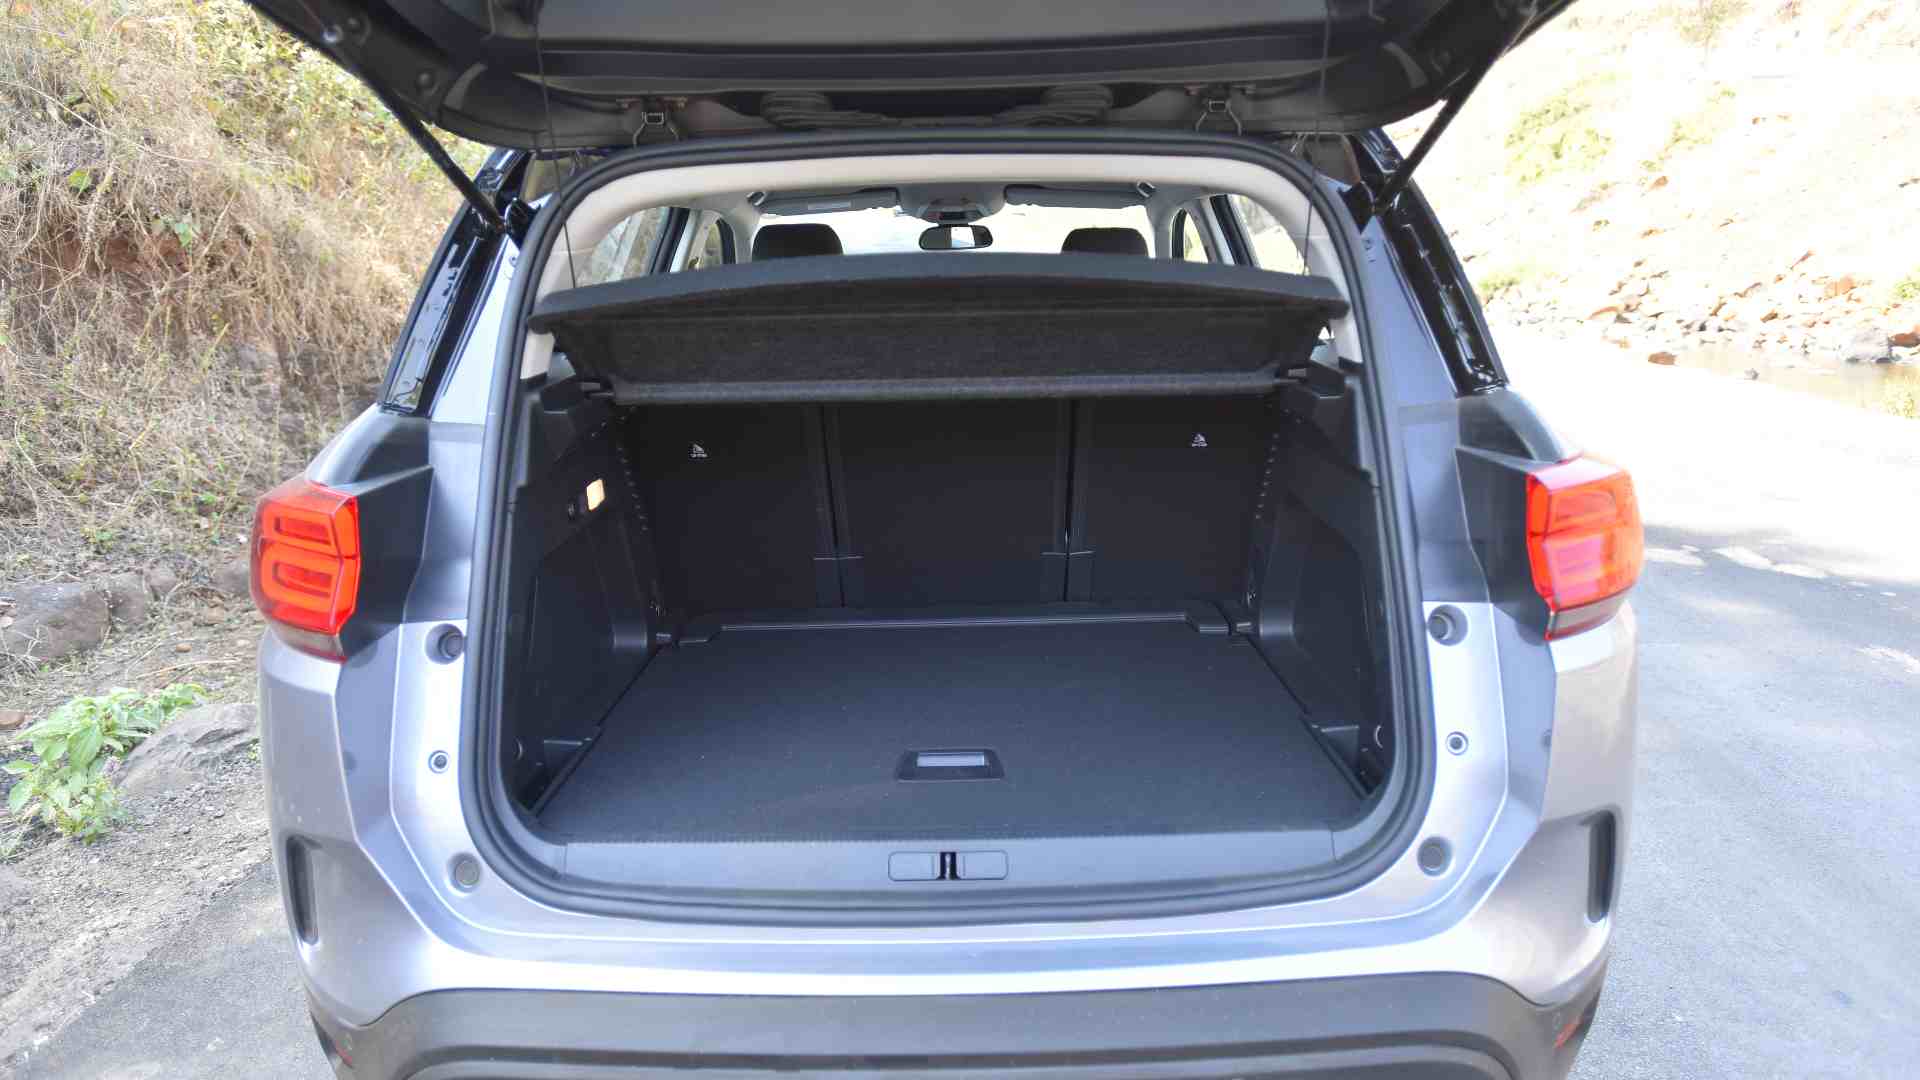 580-litre boot has enough room to comfortably gobble up luggage. Image: Overdrive/Anis Shaikh